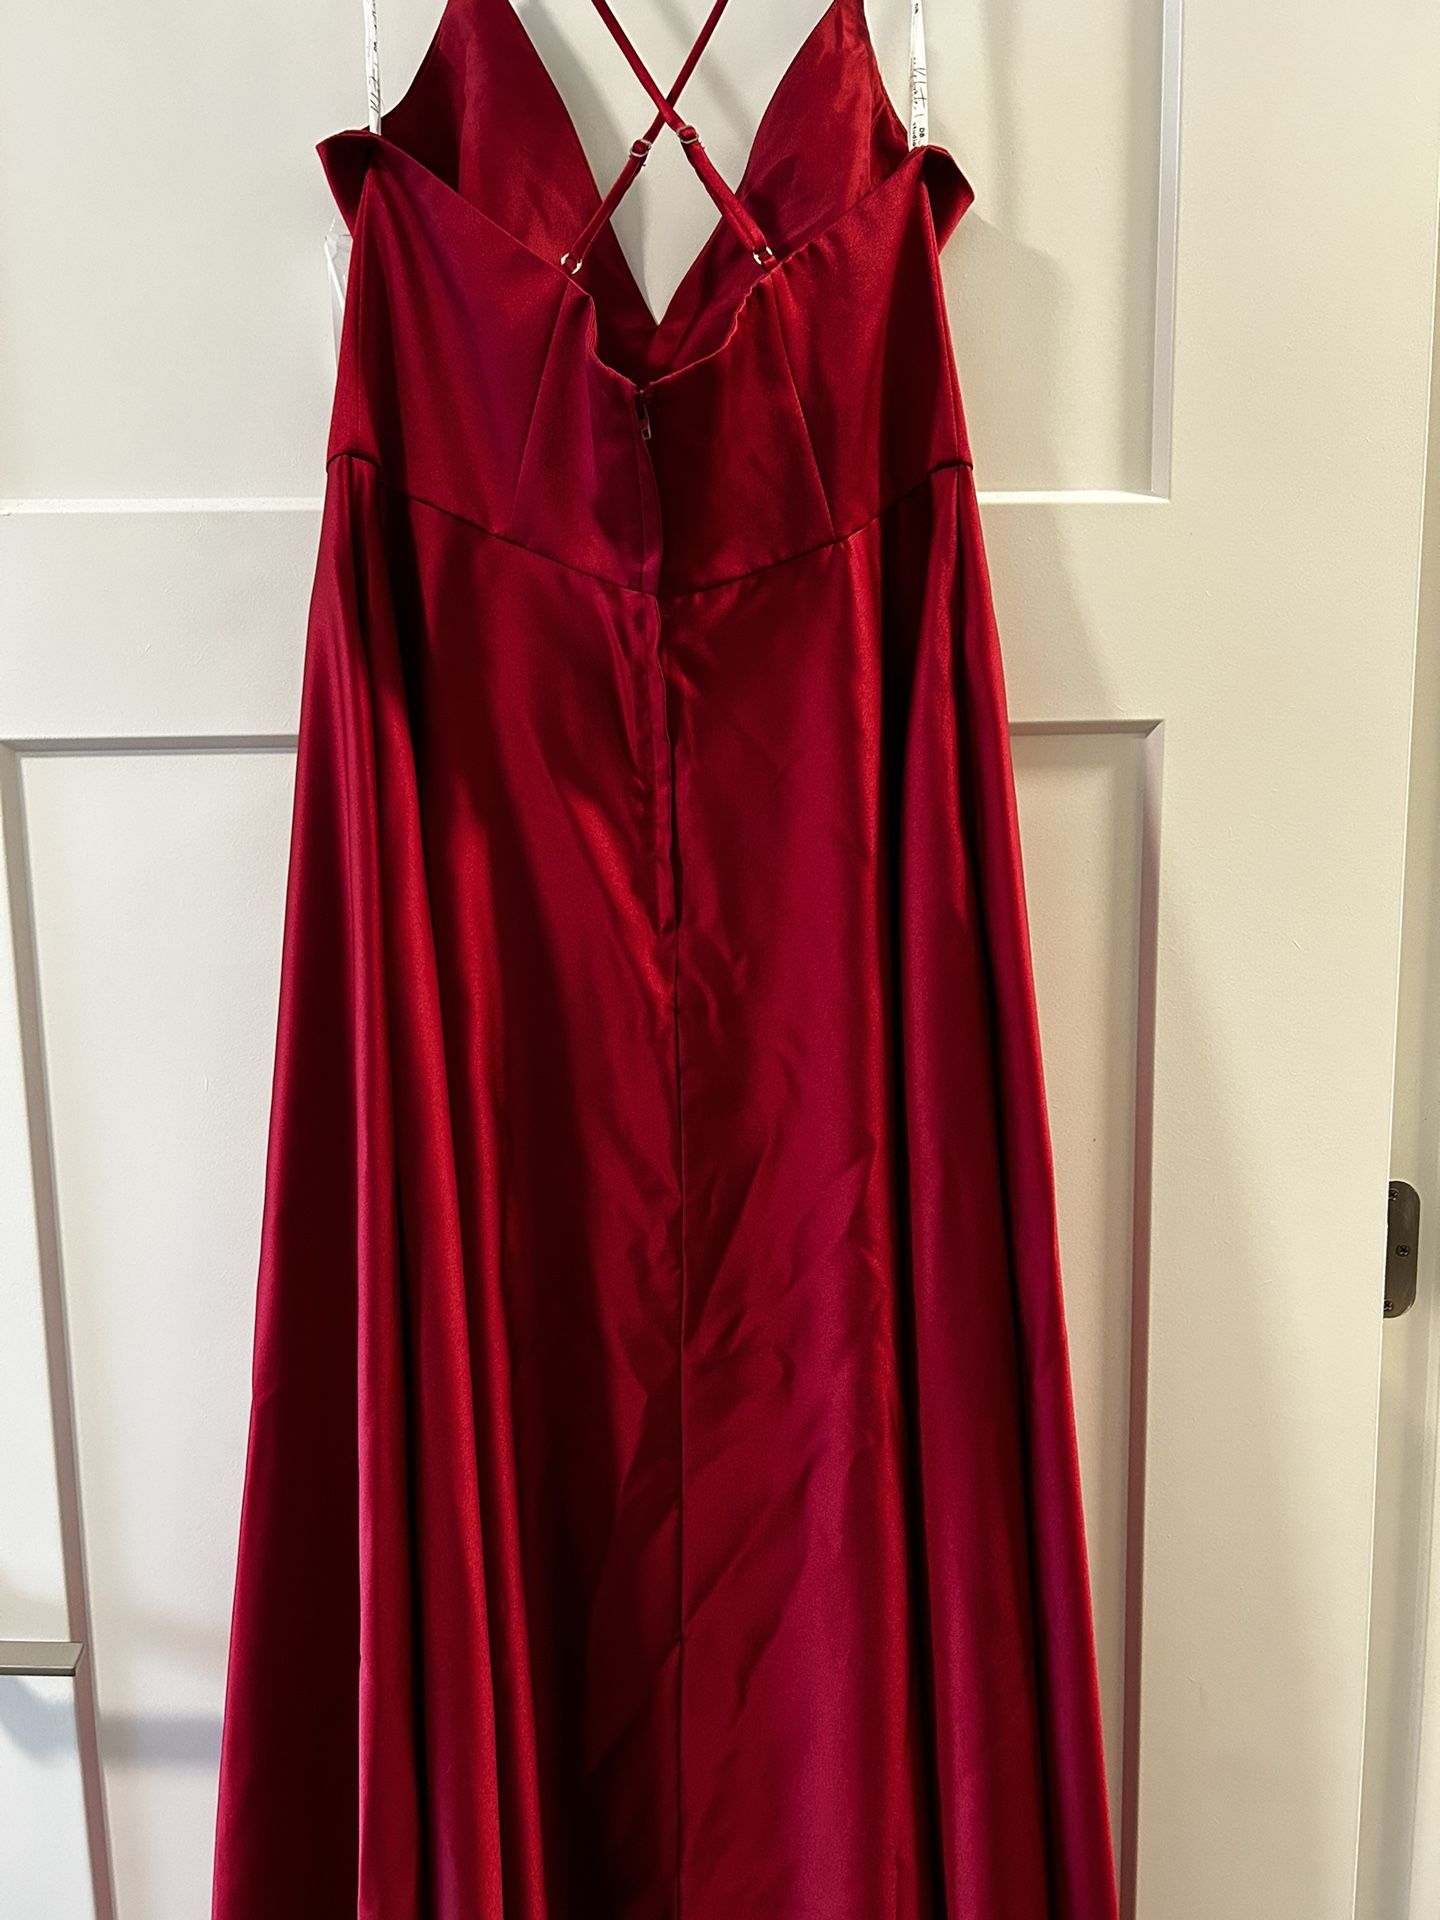 Red Satin Bridesmaid Or Prom Gown - Size 12